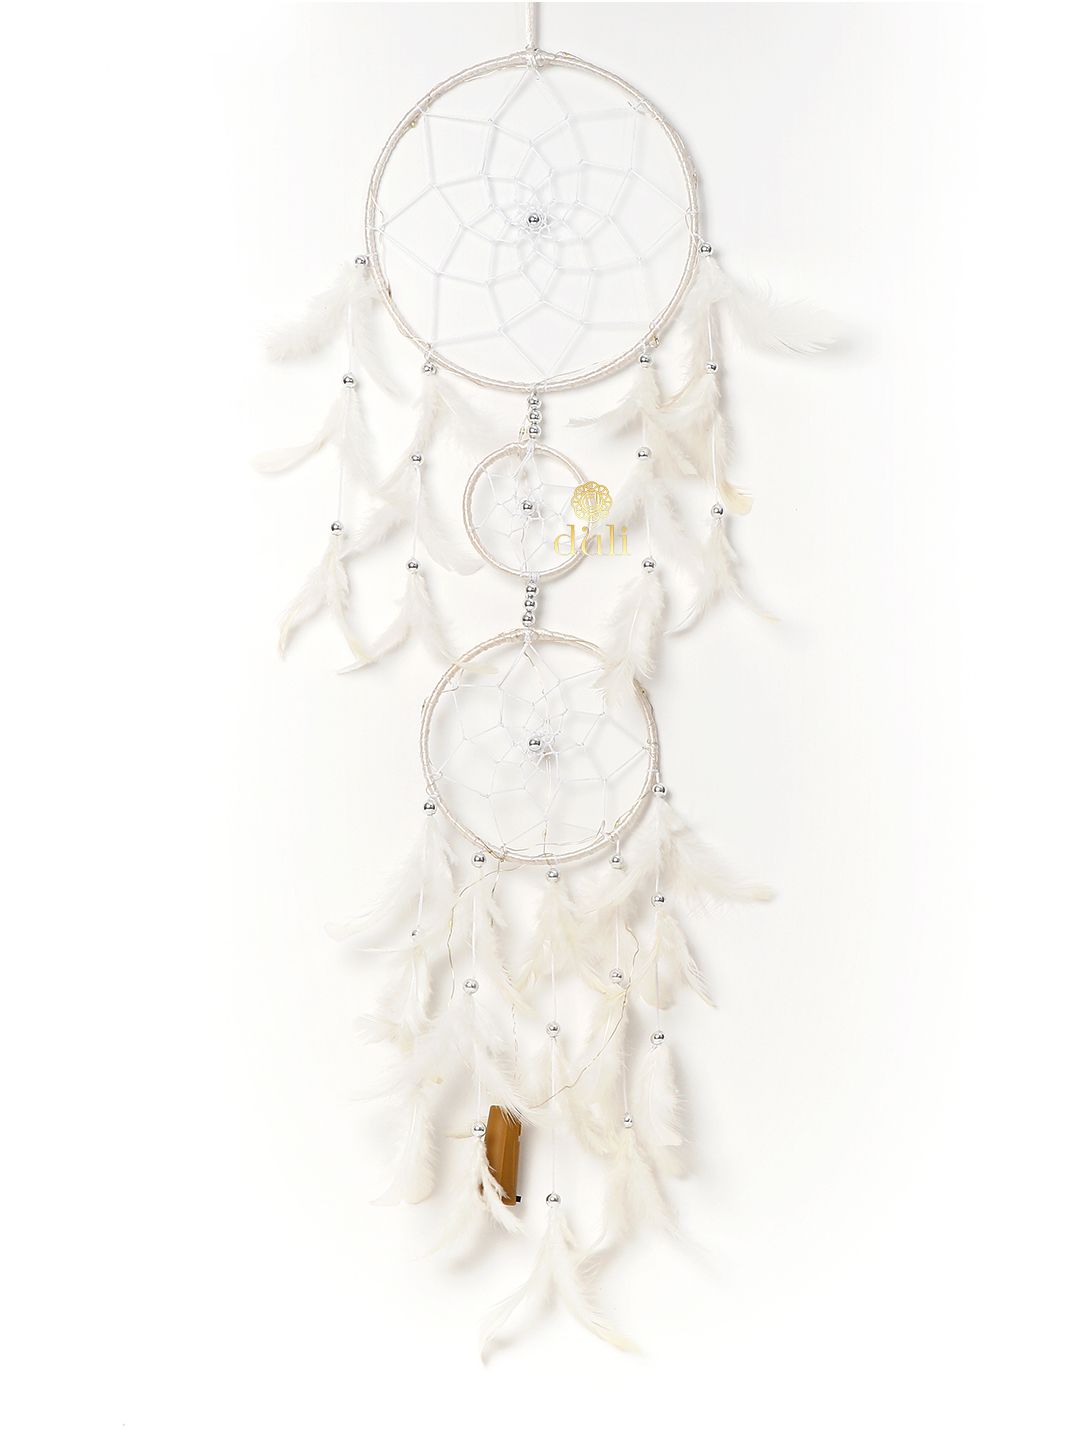 DULI White 3 Ring White Feathers Hanging Dream Catcher with Lights Price in India